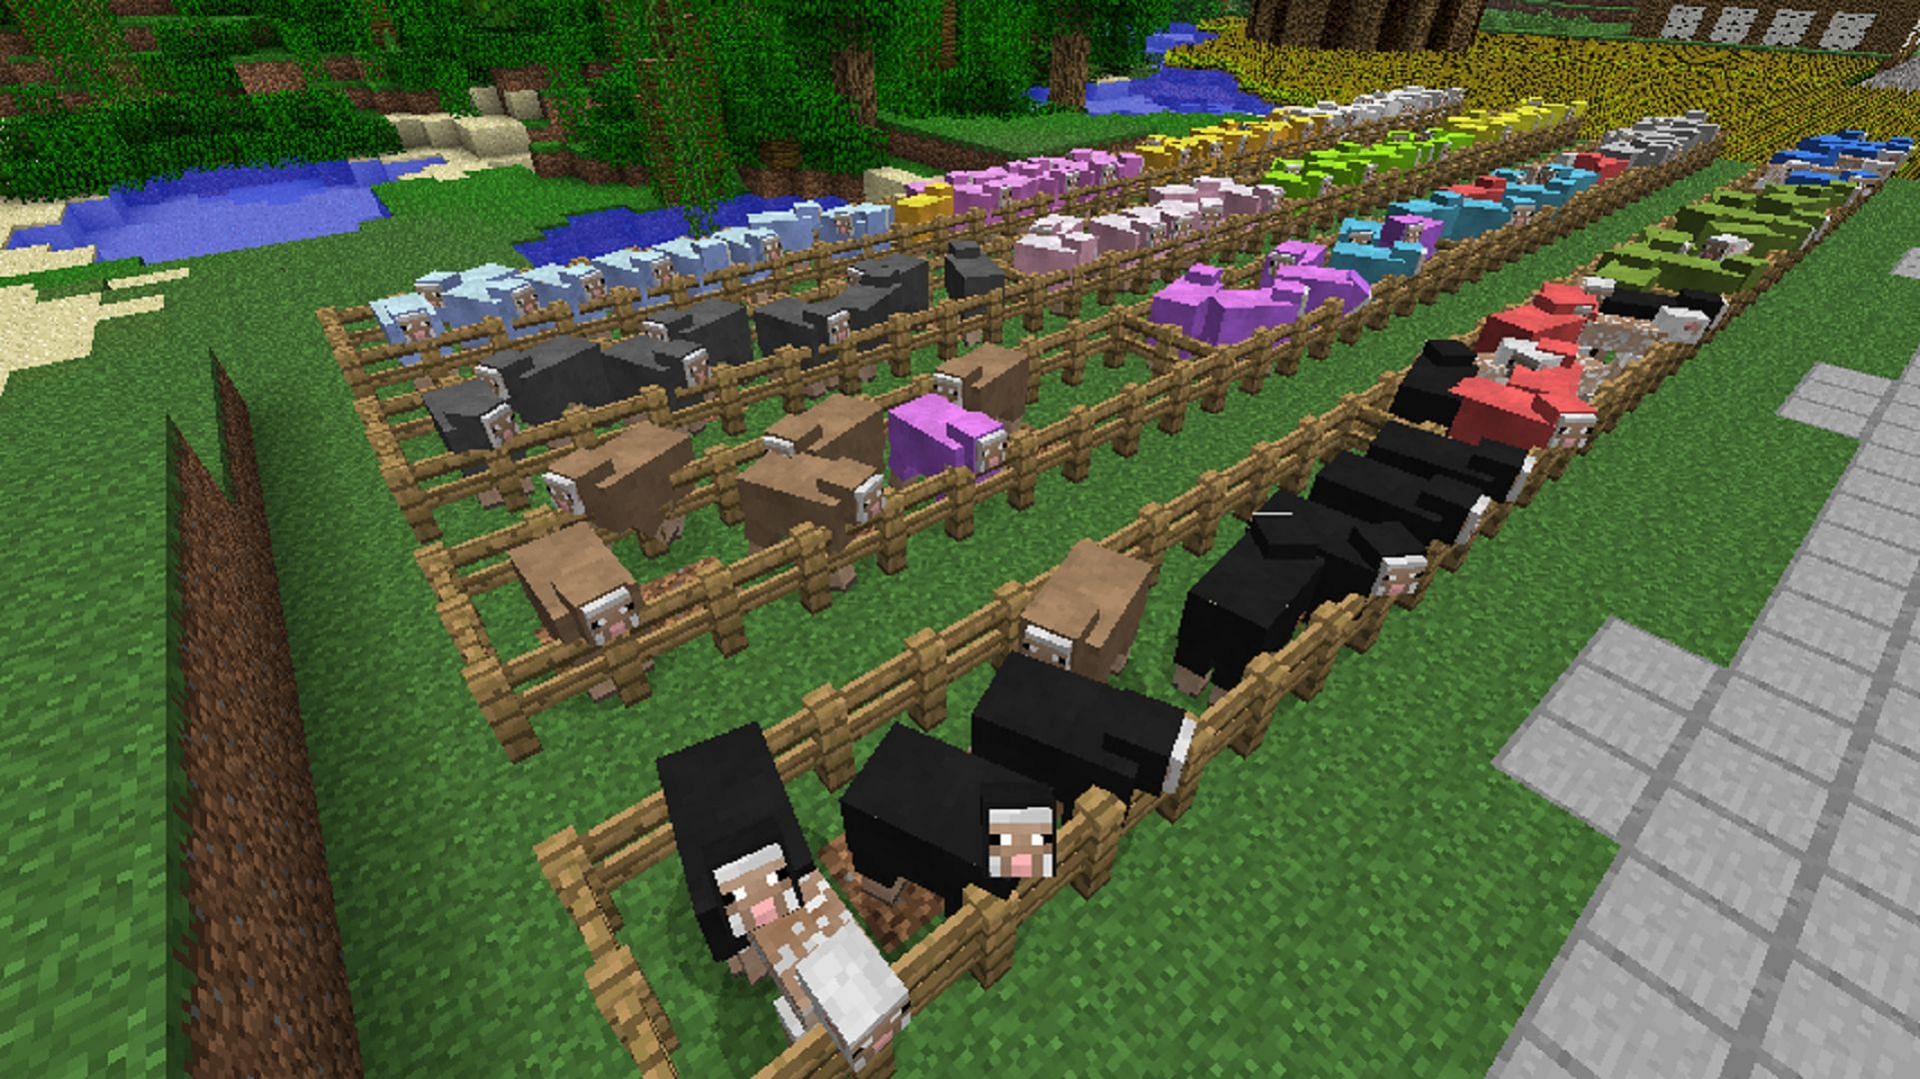 Sheep farms can be made in many different designs in Minecraft (Image via Minecraft Forum)